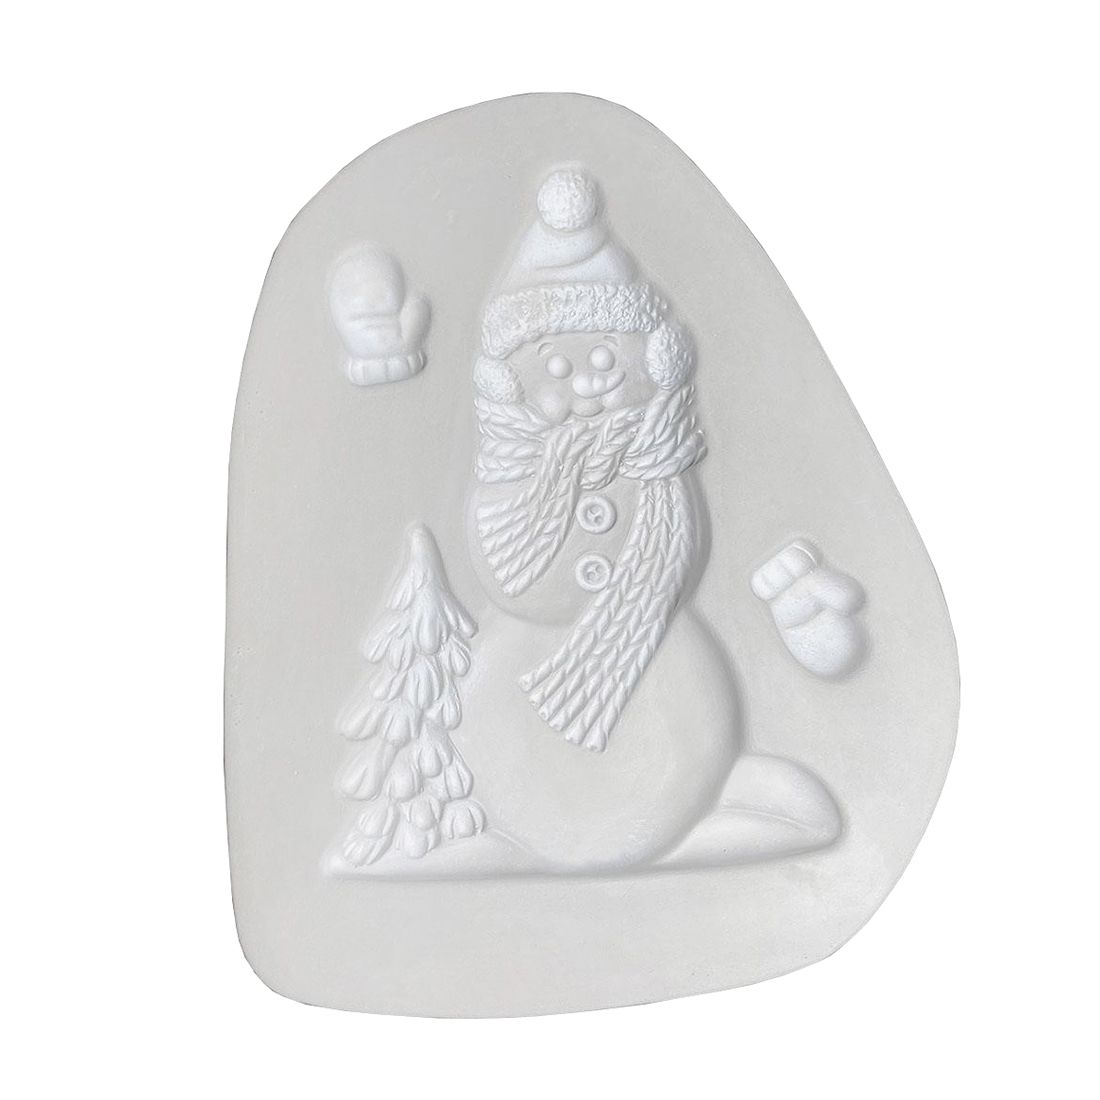 SMALL SNOWMAN MOLD by CPI